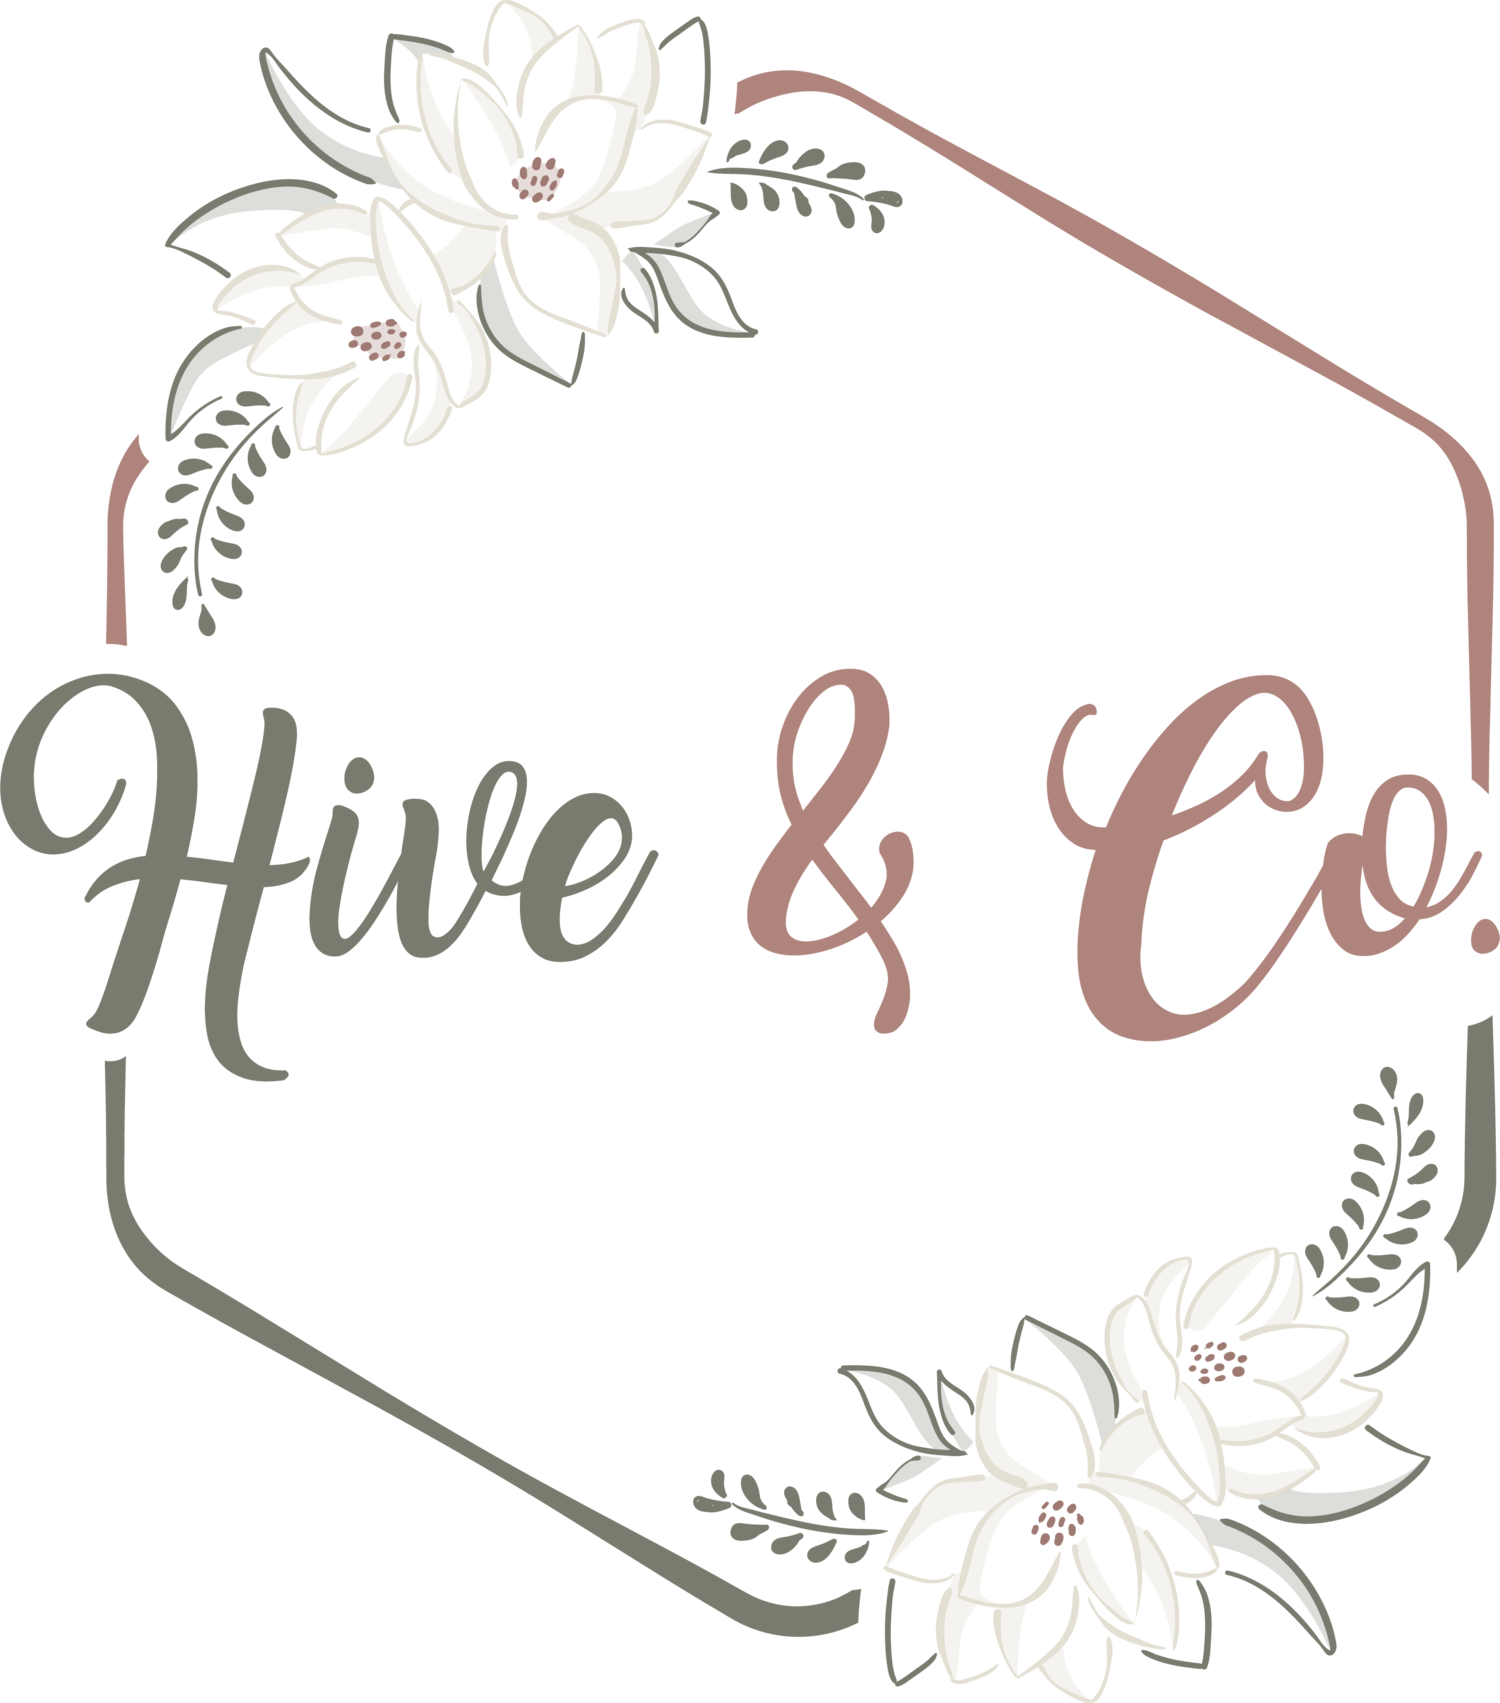 Hive &amp; Co. Events